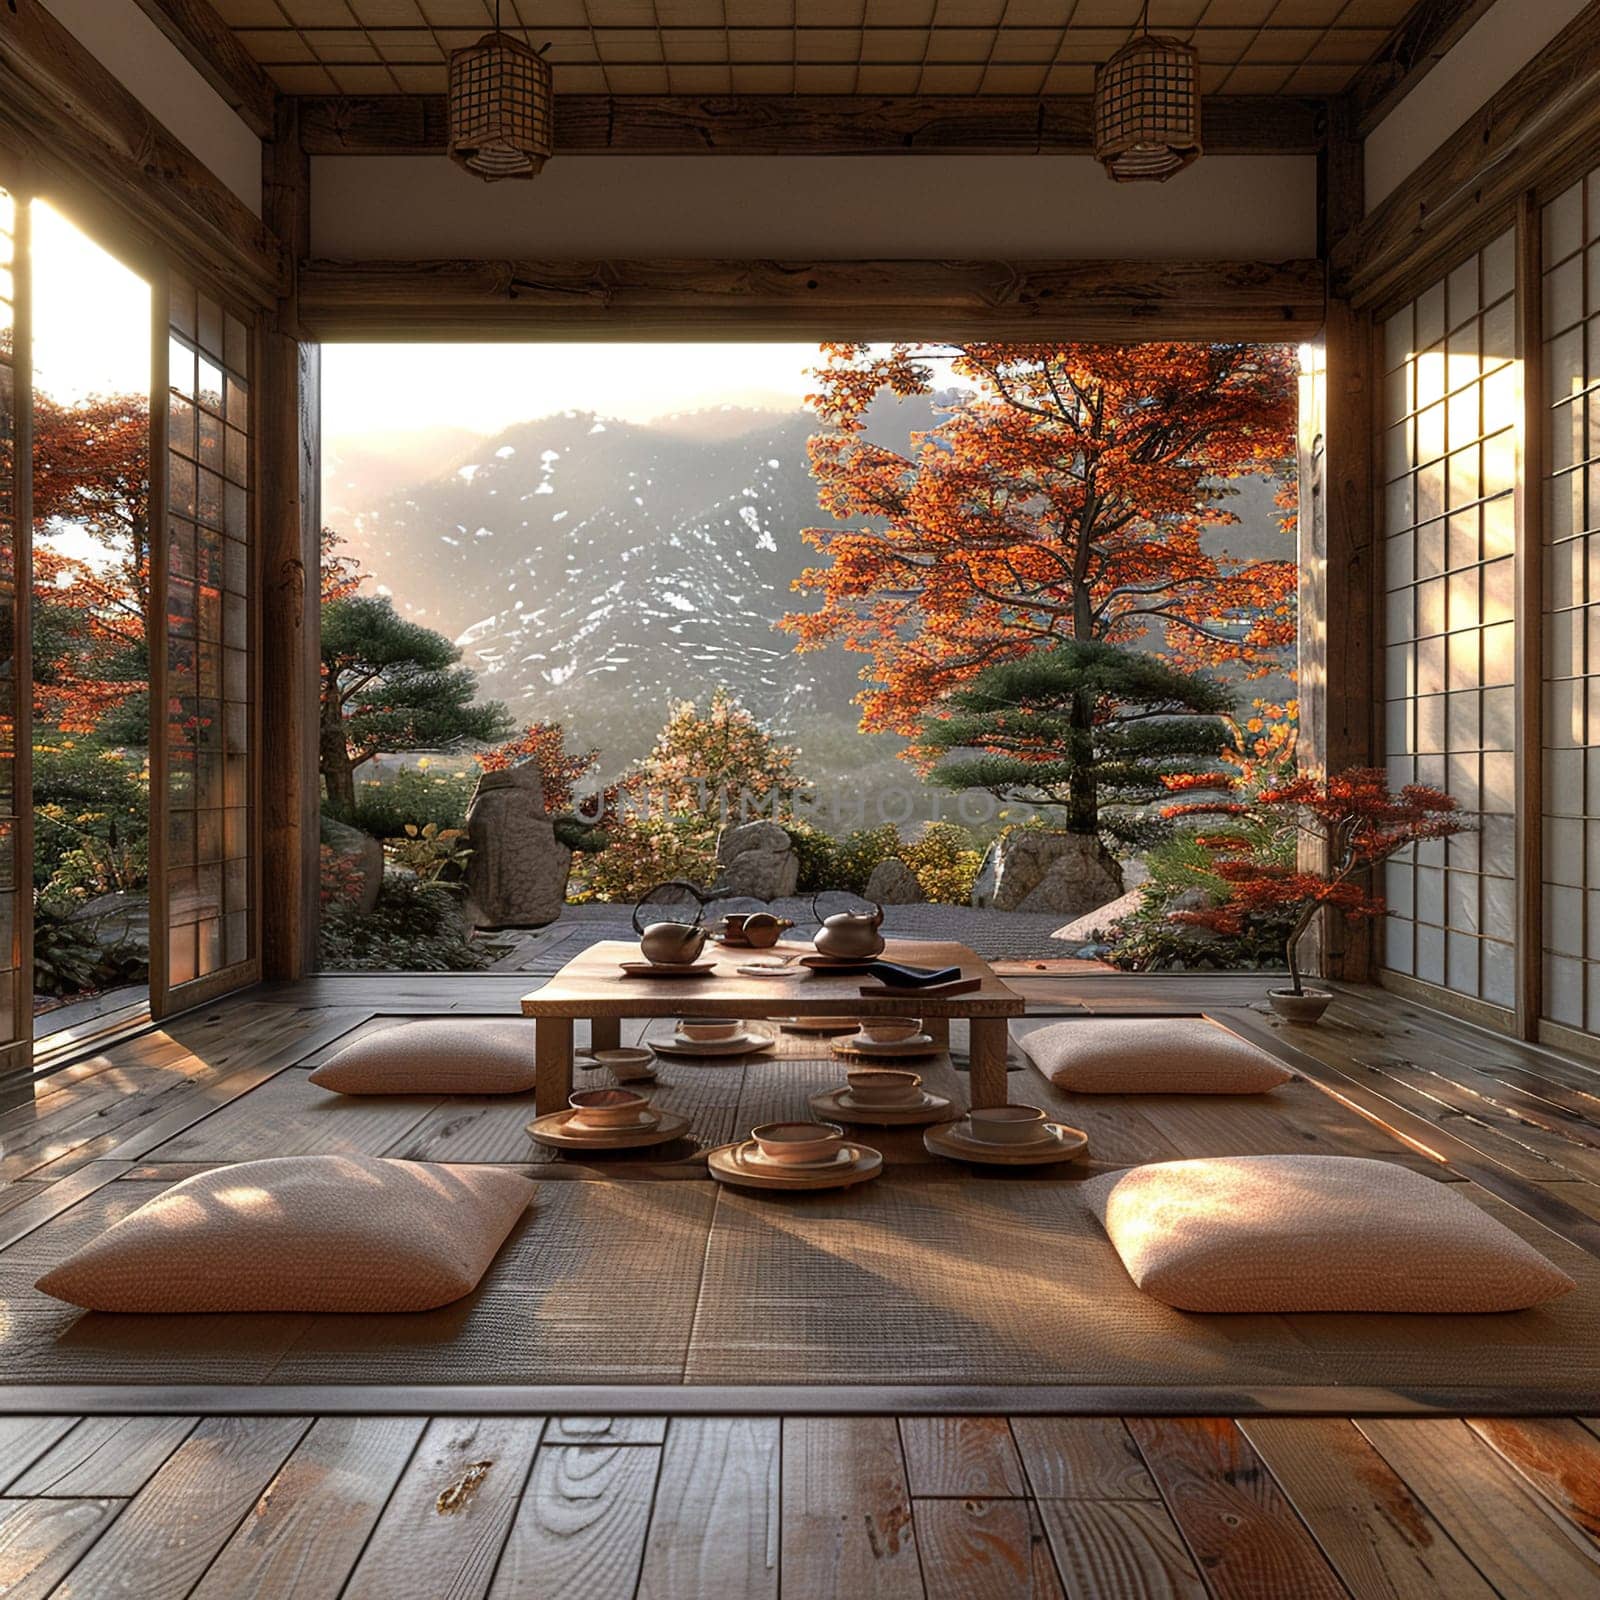 Traditional Japanese tea room with tatami flooring and shoji screenssuper detailed